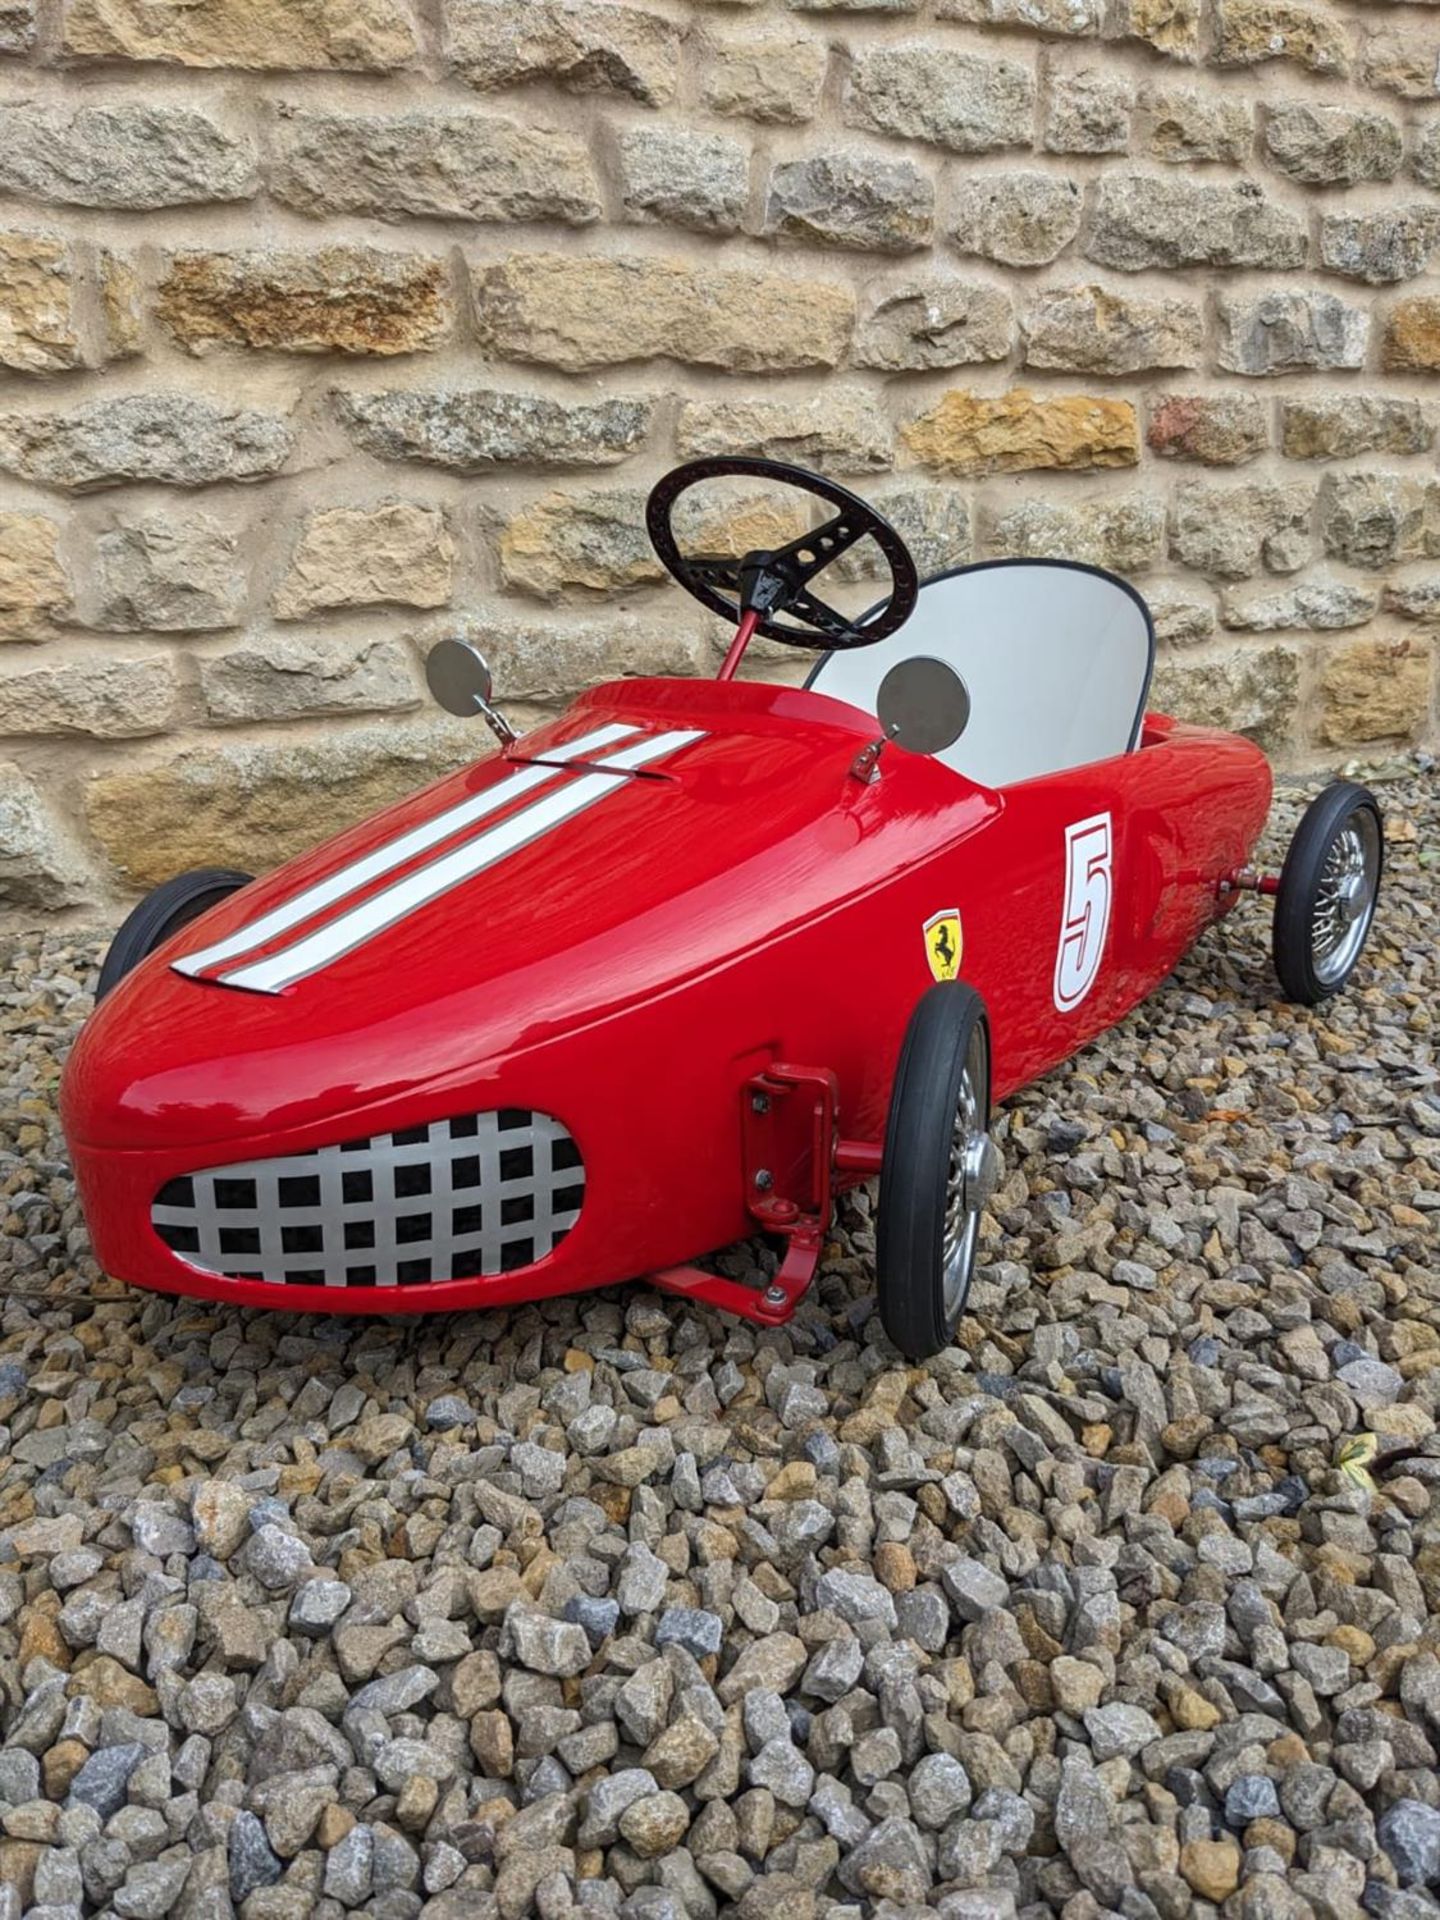 Ferrari Spa 156 Sharknose Morellet-Guerineau Pedal Car Fastidioulsy Restored - Image 3 of 8